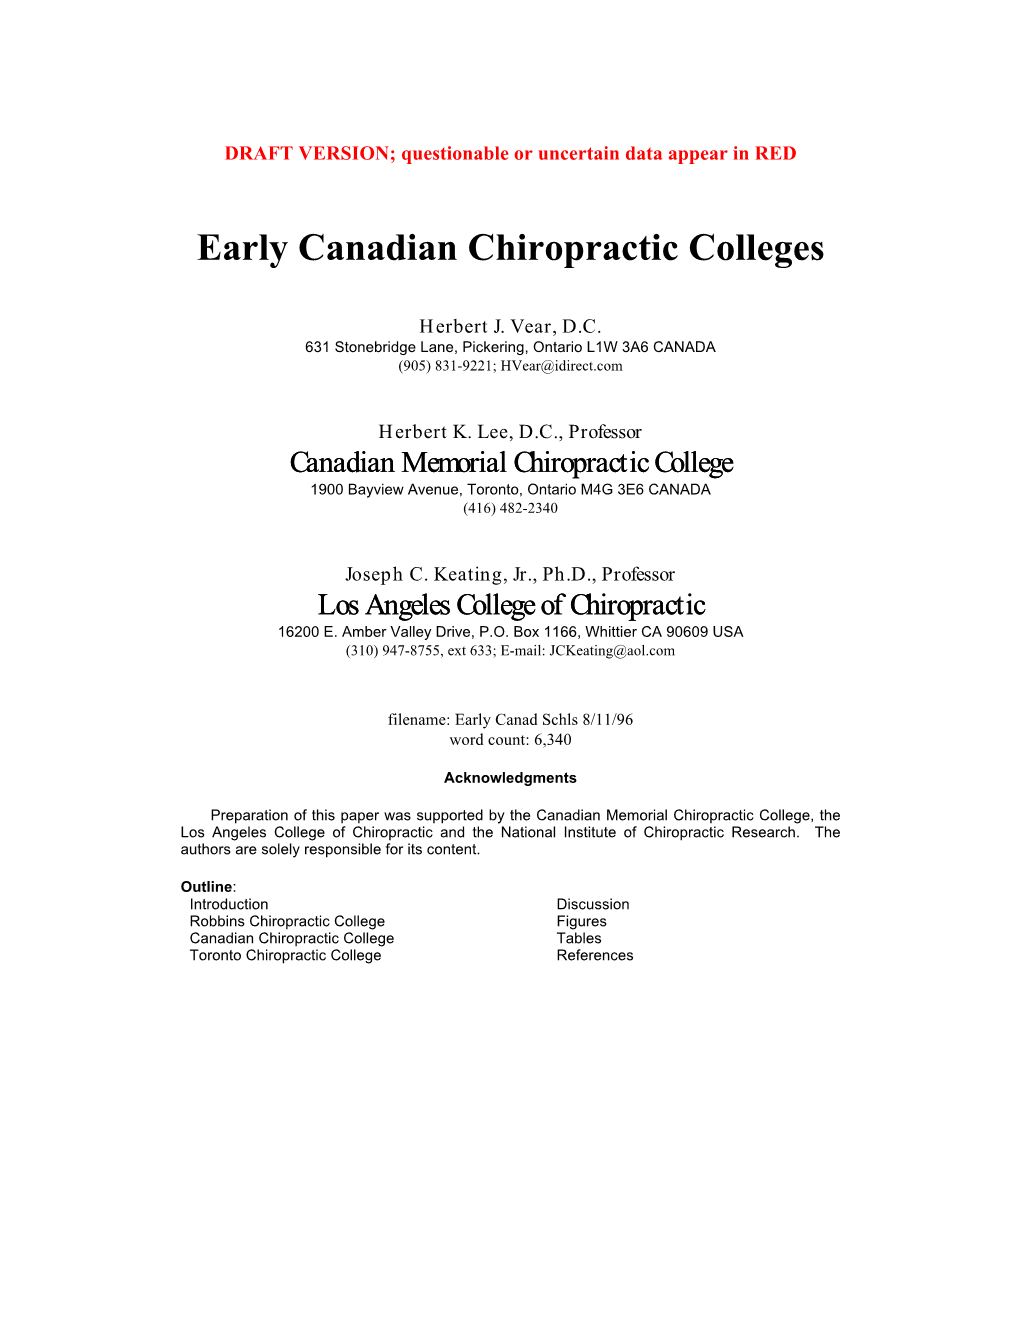 Early Canadian Chiropractic Colleges